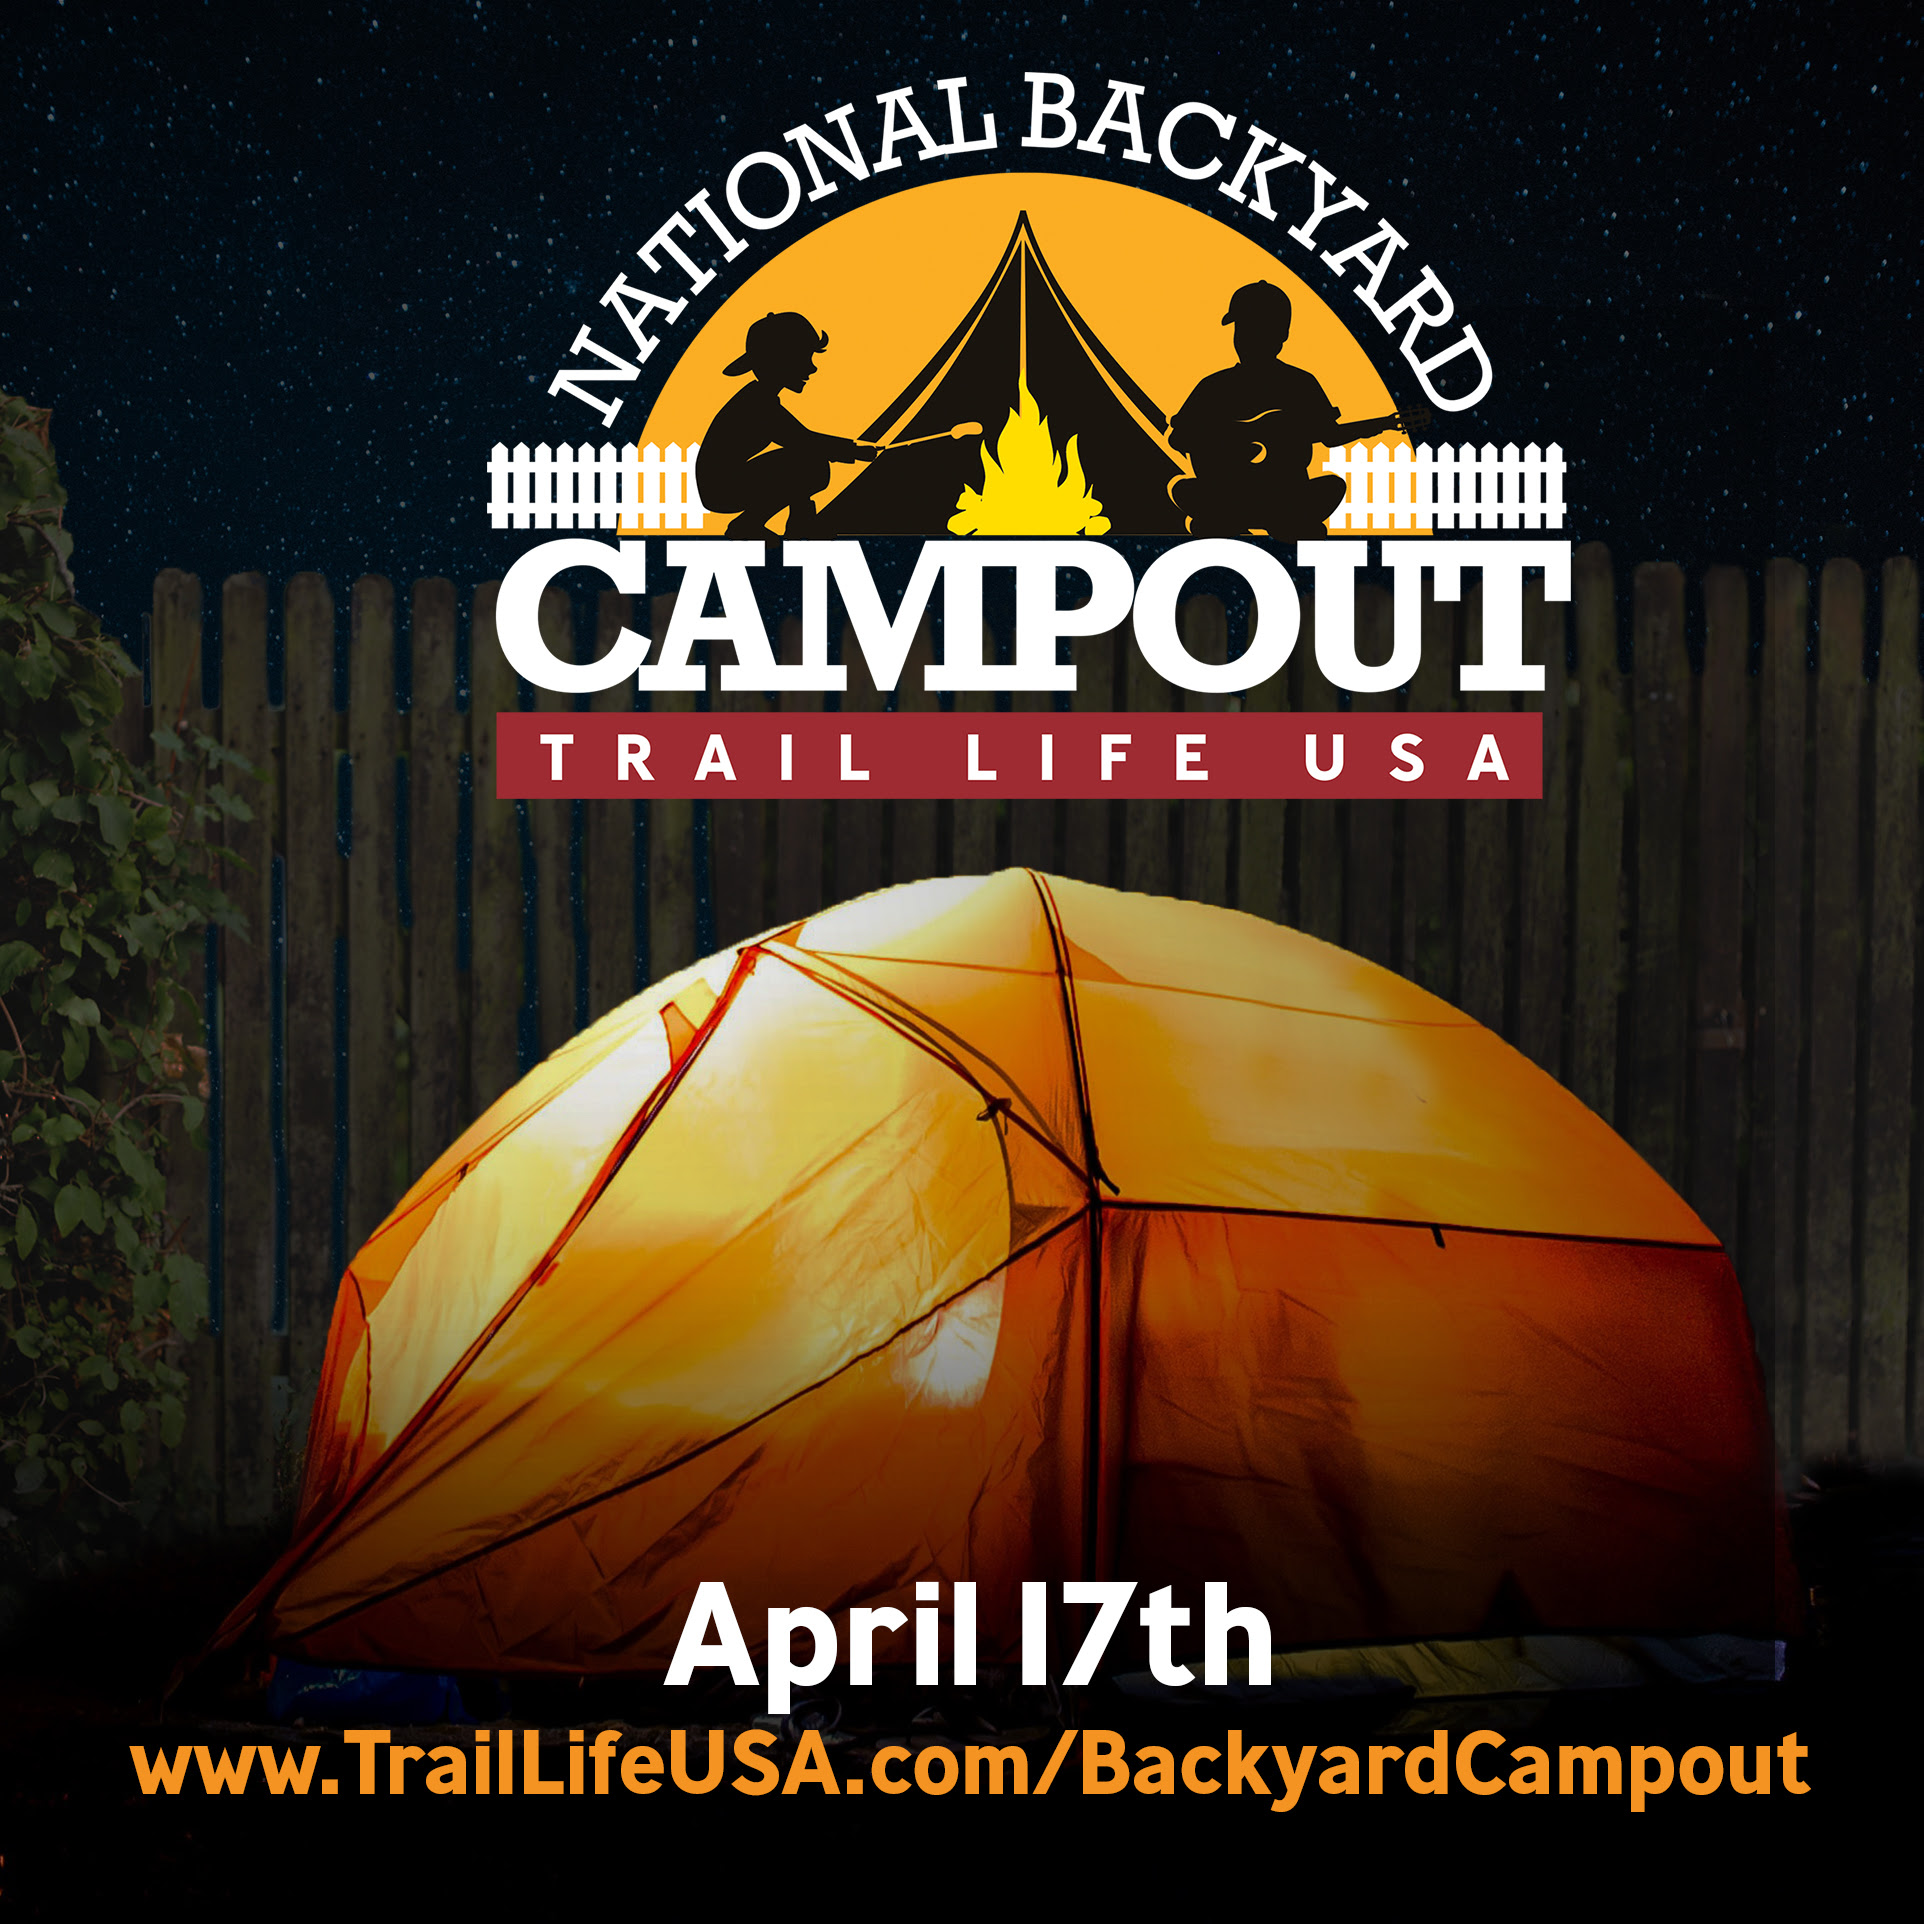 National Backyard Campout Updated Square.jpg